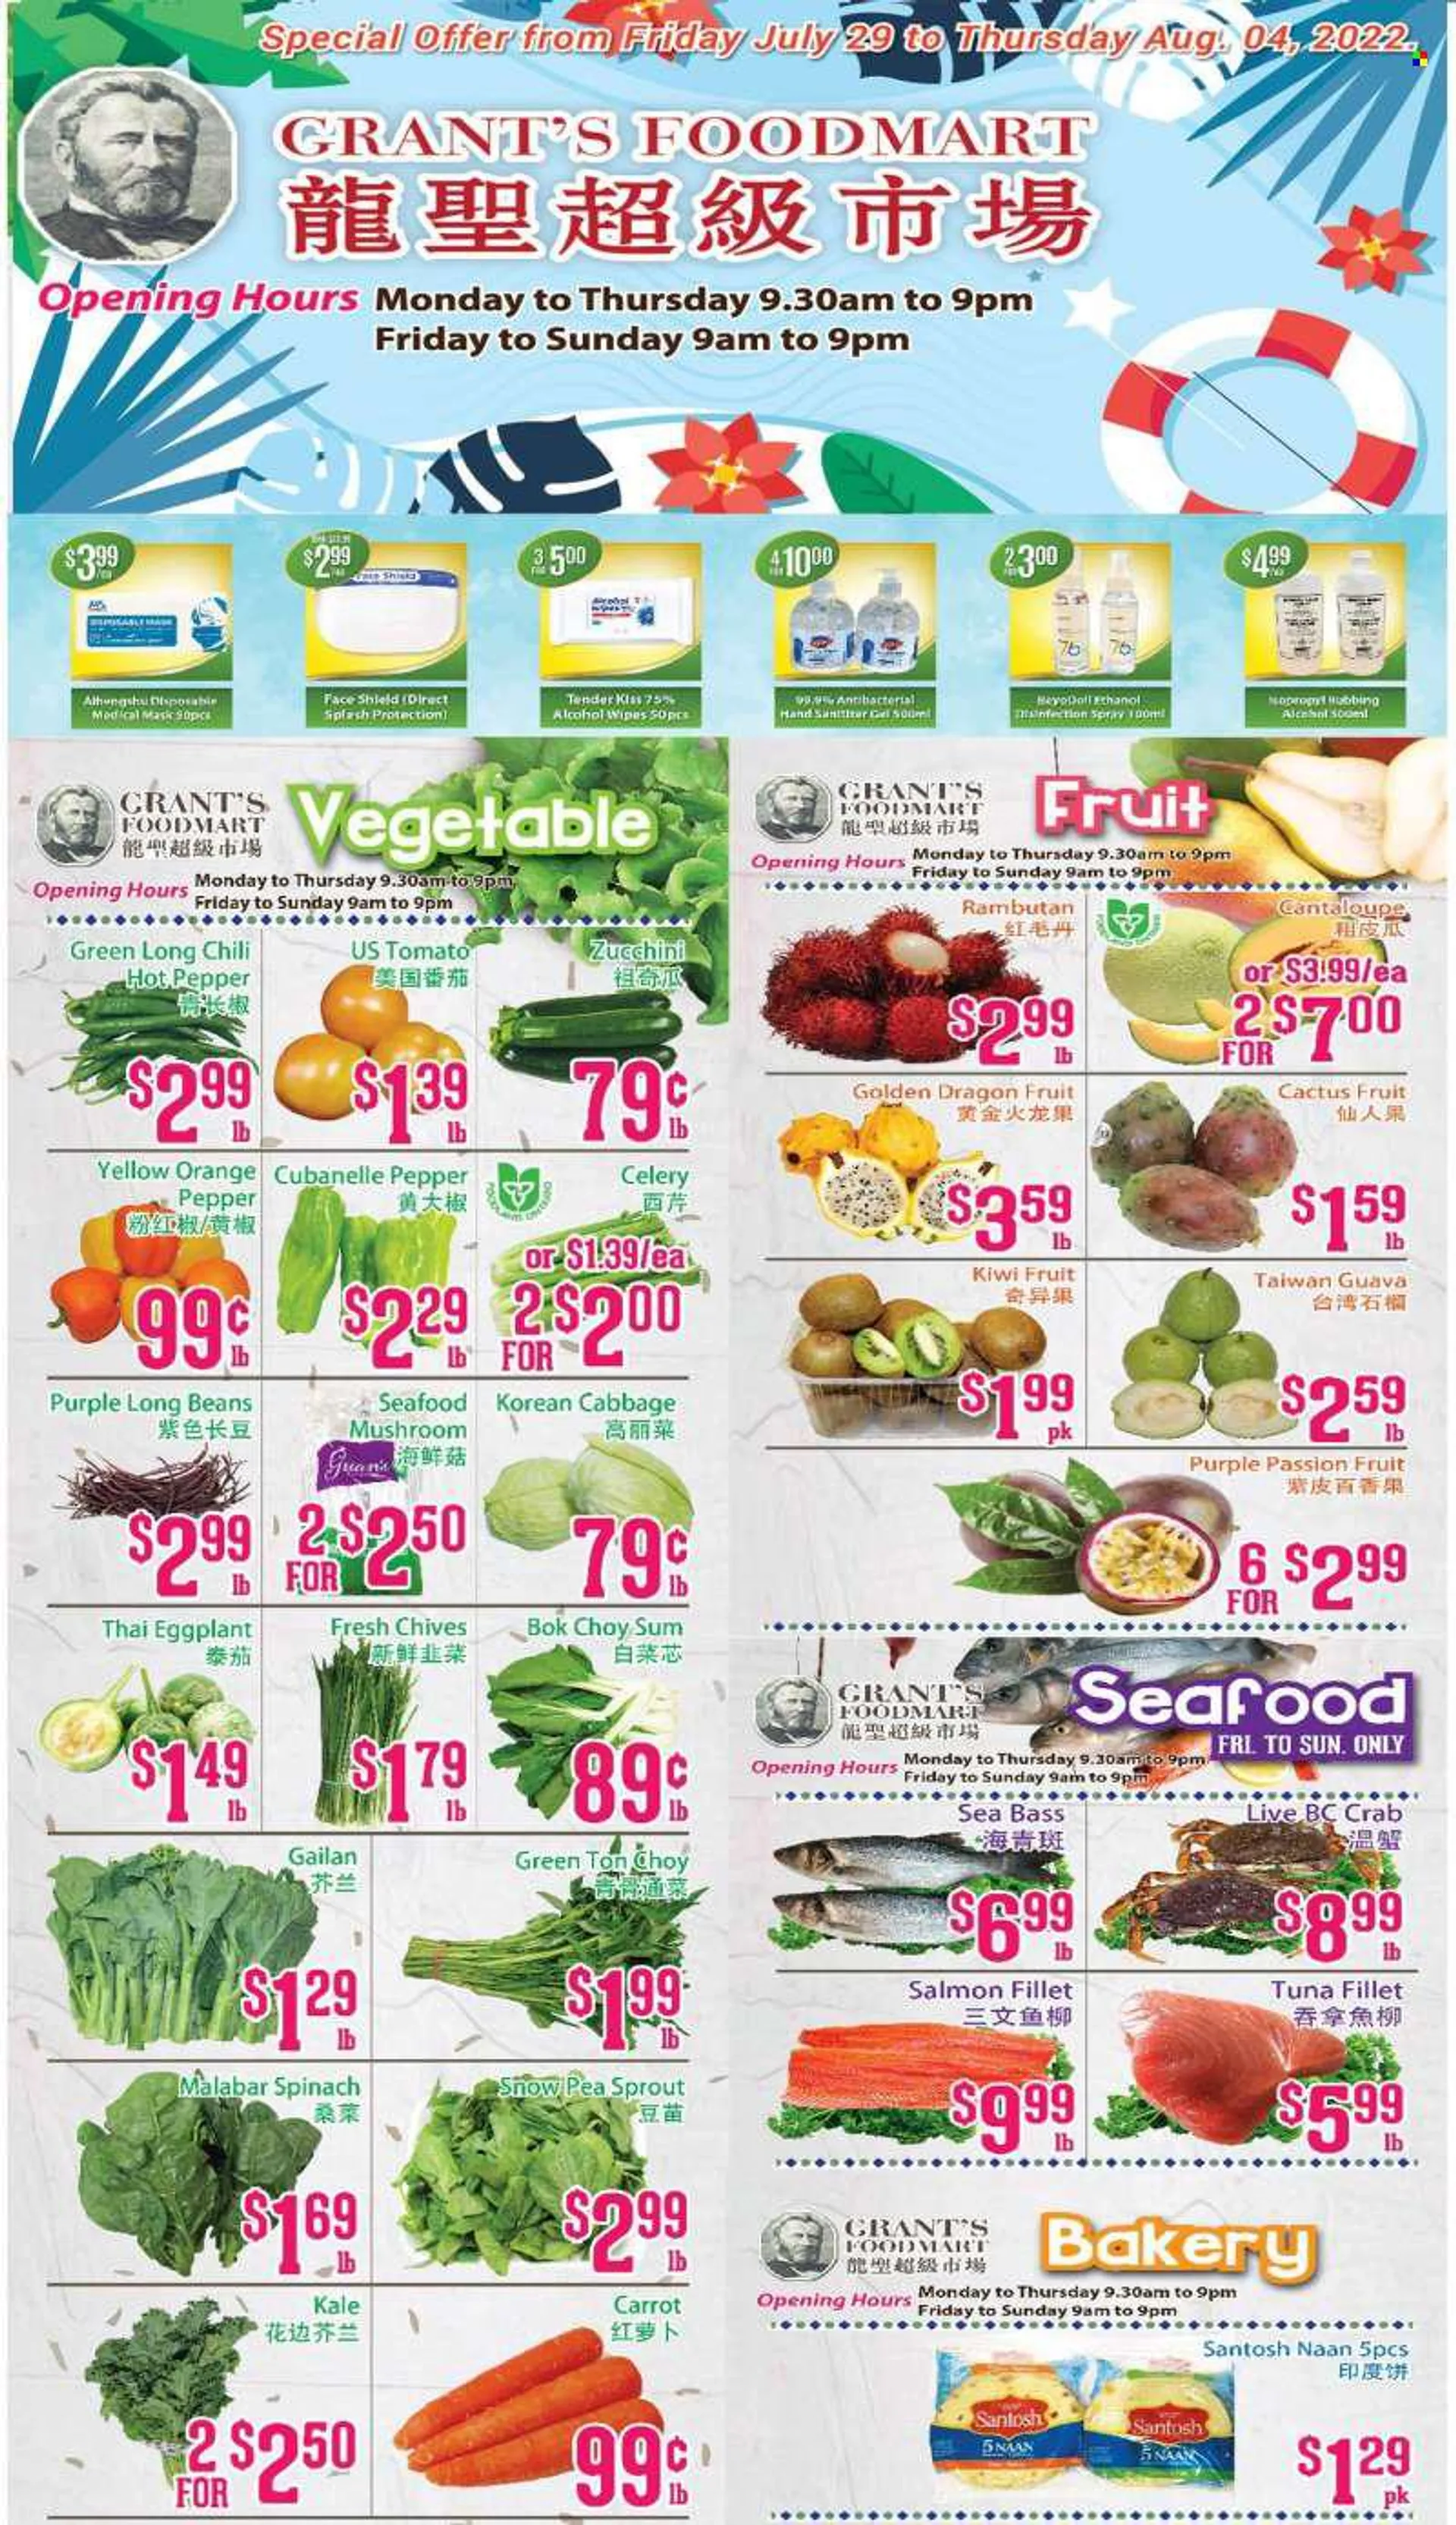 Grants Foodmart Flyer - July 29, 2022 - August 04, 2022 - Sales products - mushroom, beans, bok choy, cabbage, cantaloupe, celery, spinach, zucchini squash, kale, eggplant, chives, guava, orange, dragon fruits, salmon, salmon fillet, sea bass, tuna, seafo